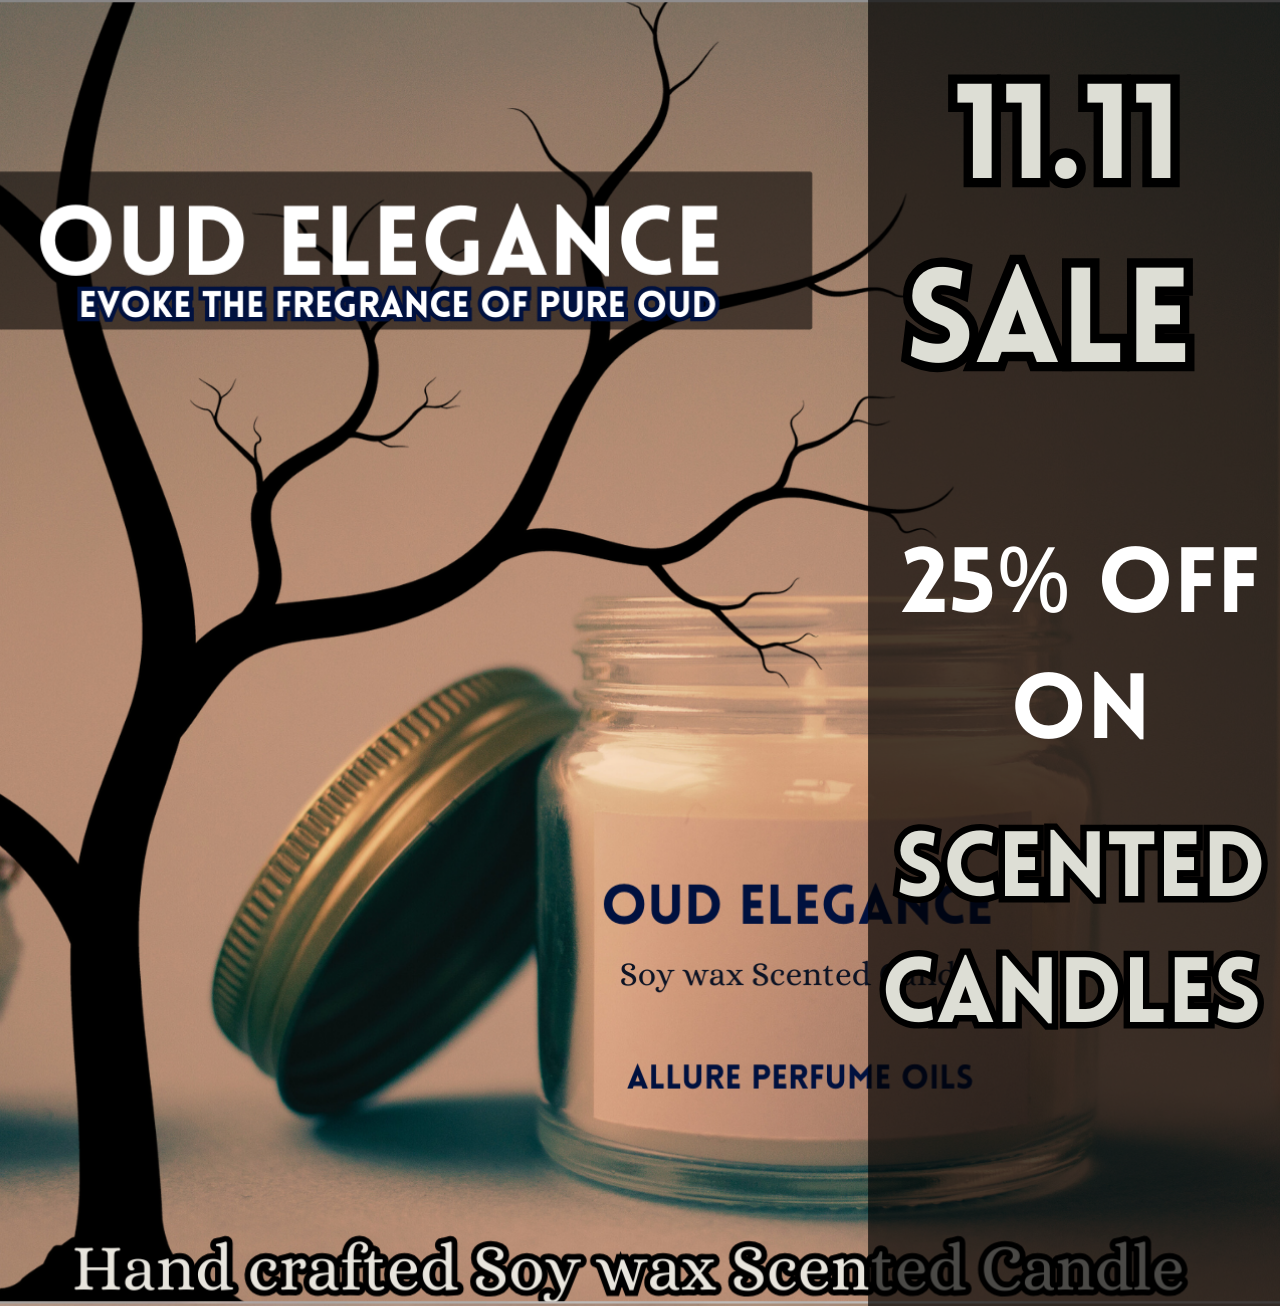 Oud Elegance Soy Wax Scented Candle